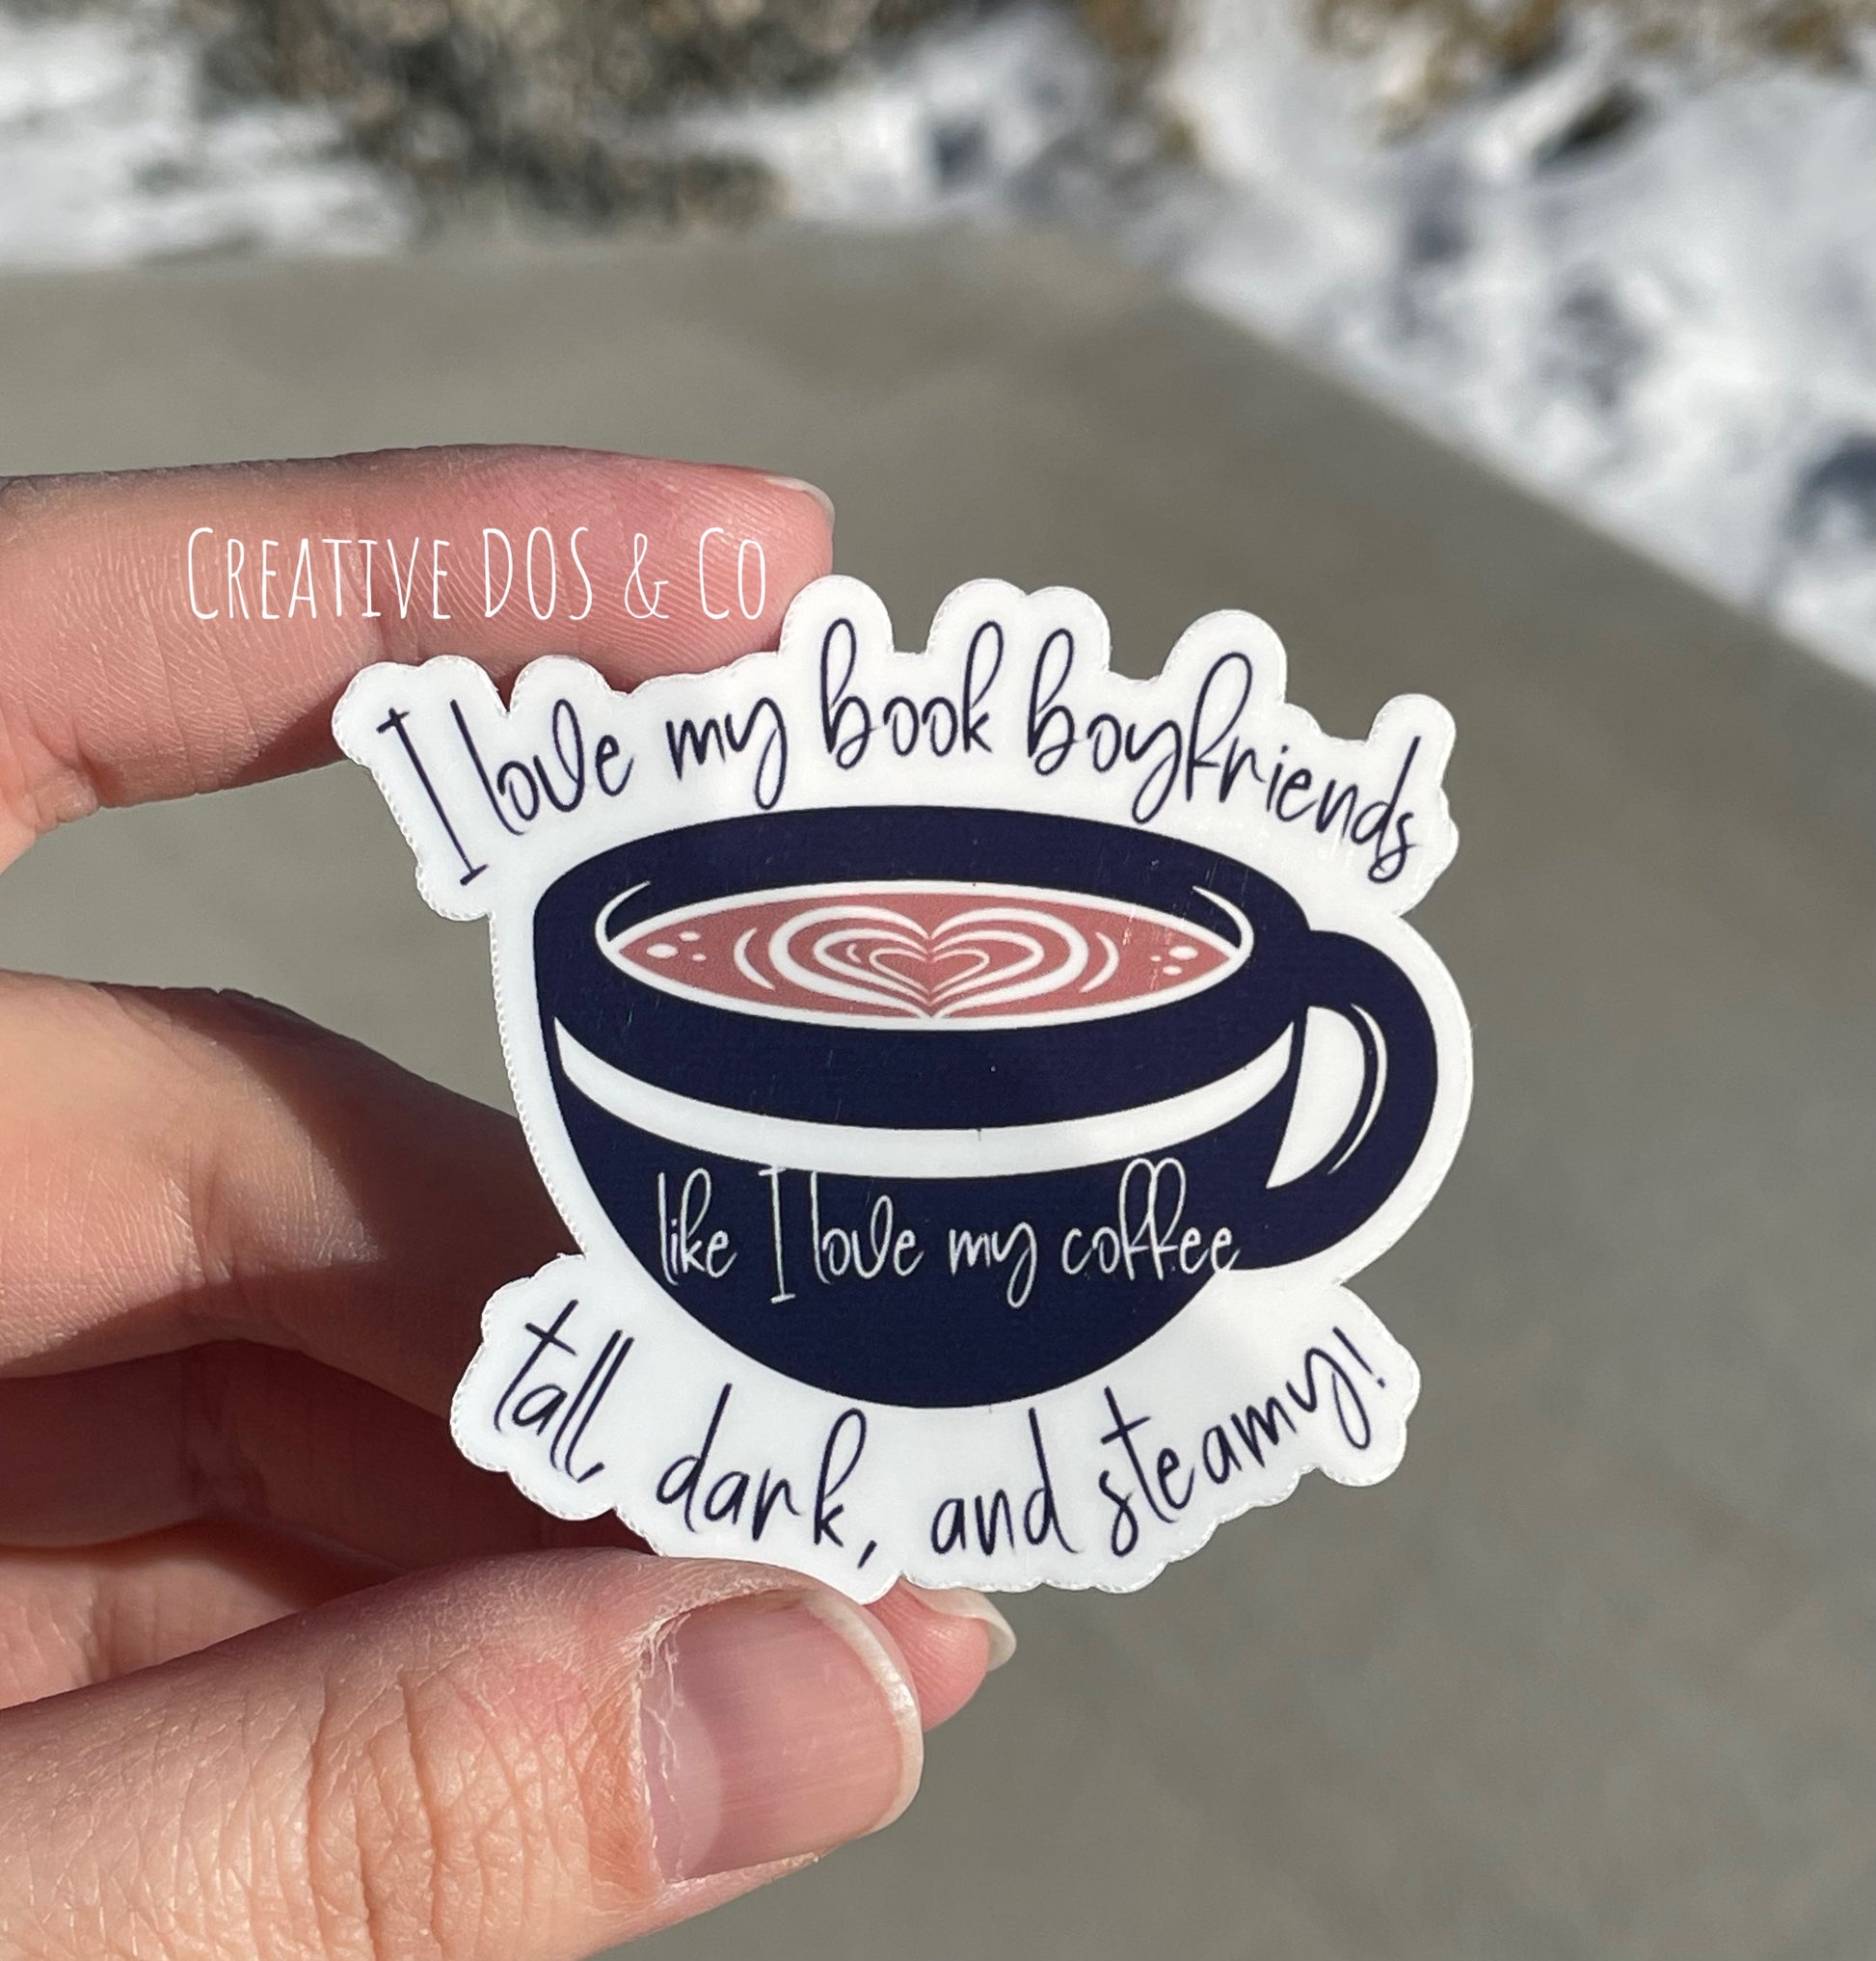 Fueled By Coffee And Books / Bookish Aesthetic Coffee Lover Flowers For  Book Kindle Tropes Girlie Readers Tbr - Bookworm - Sticker